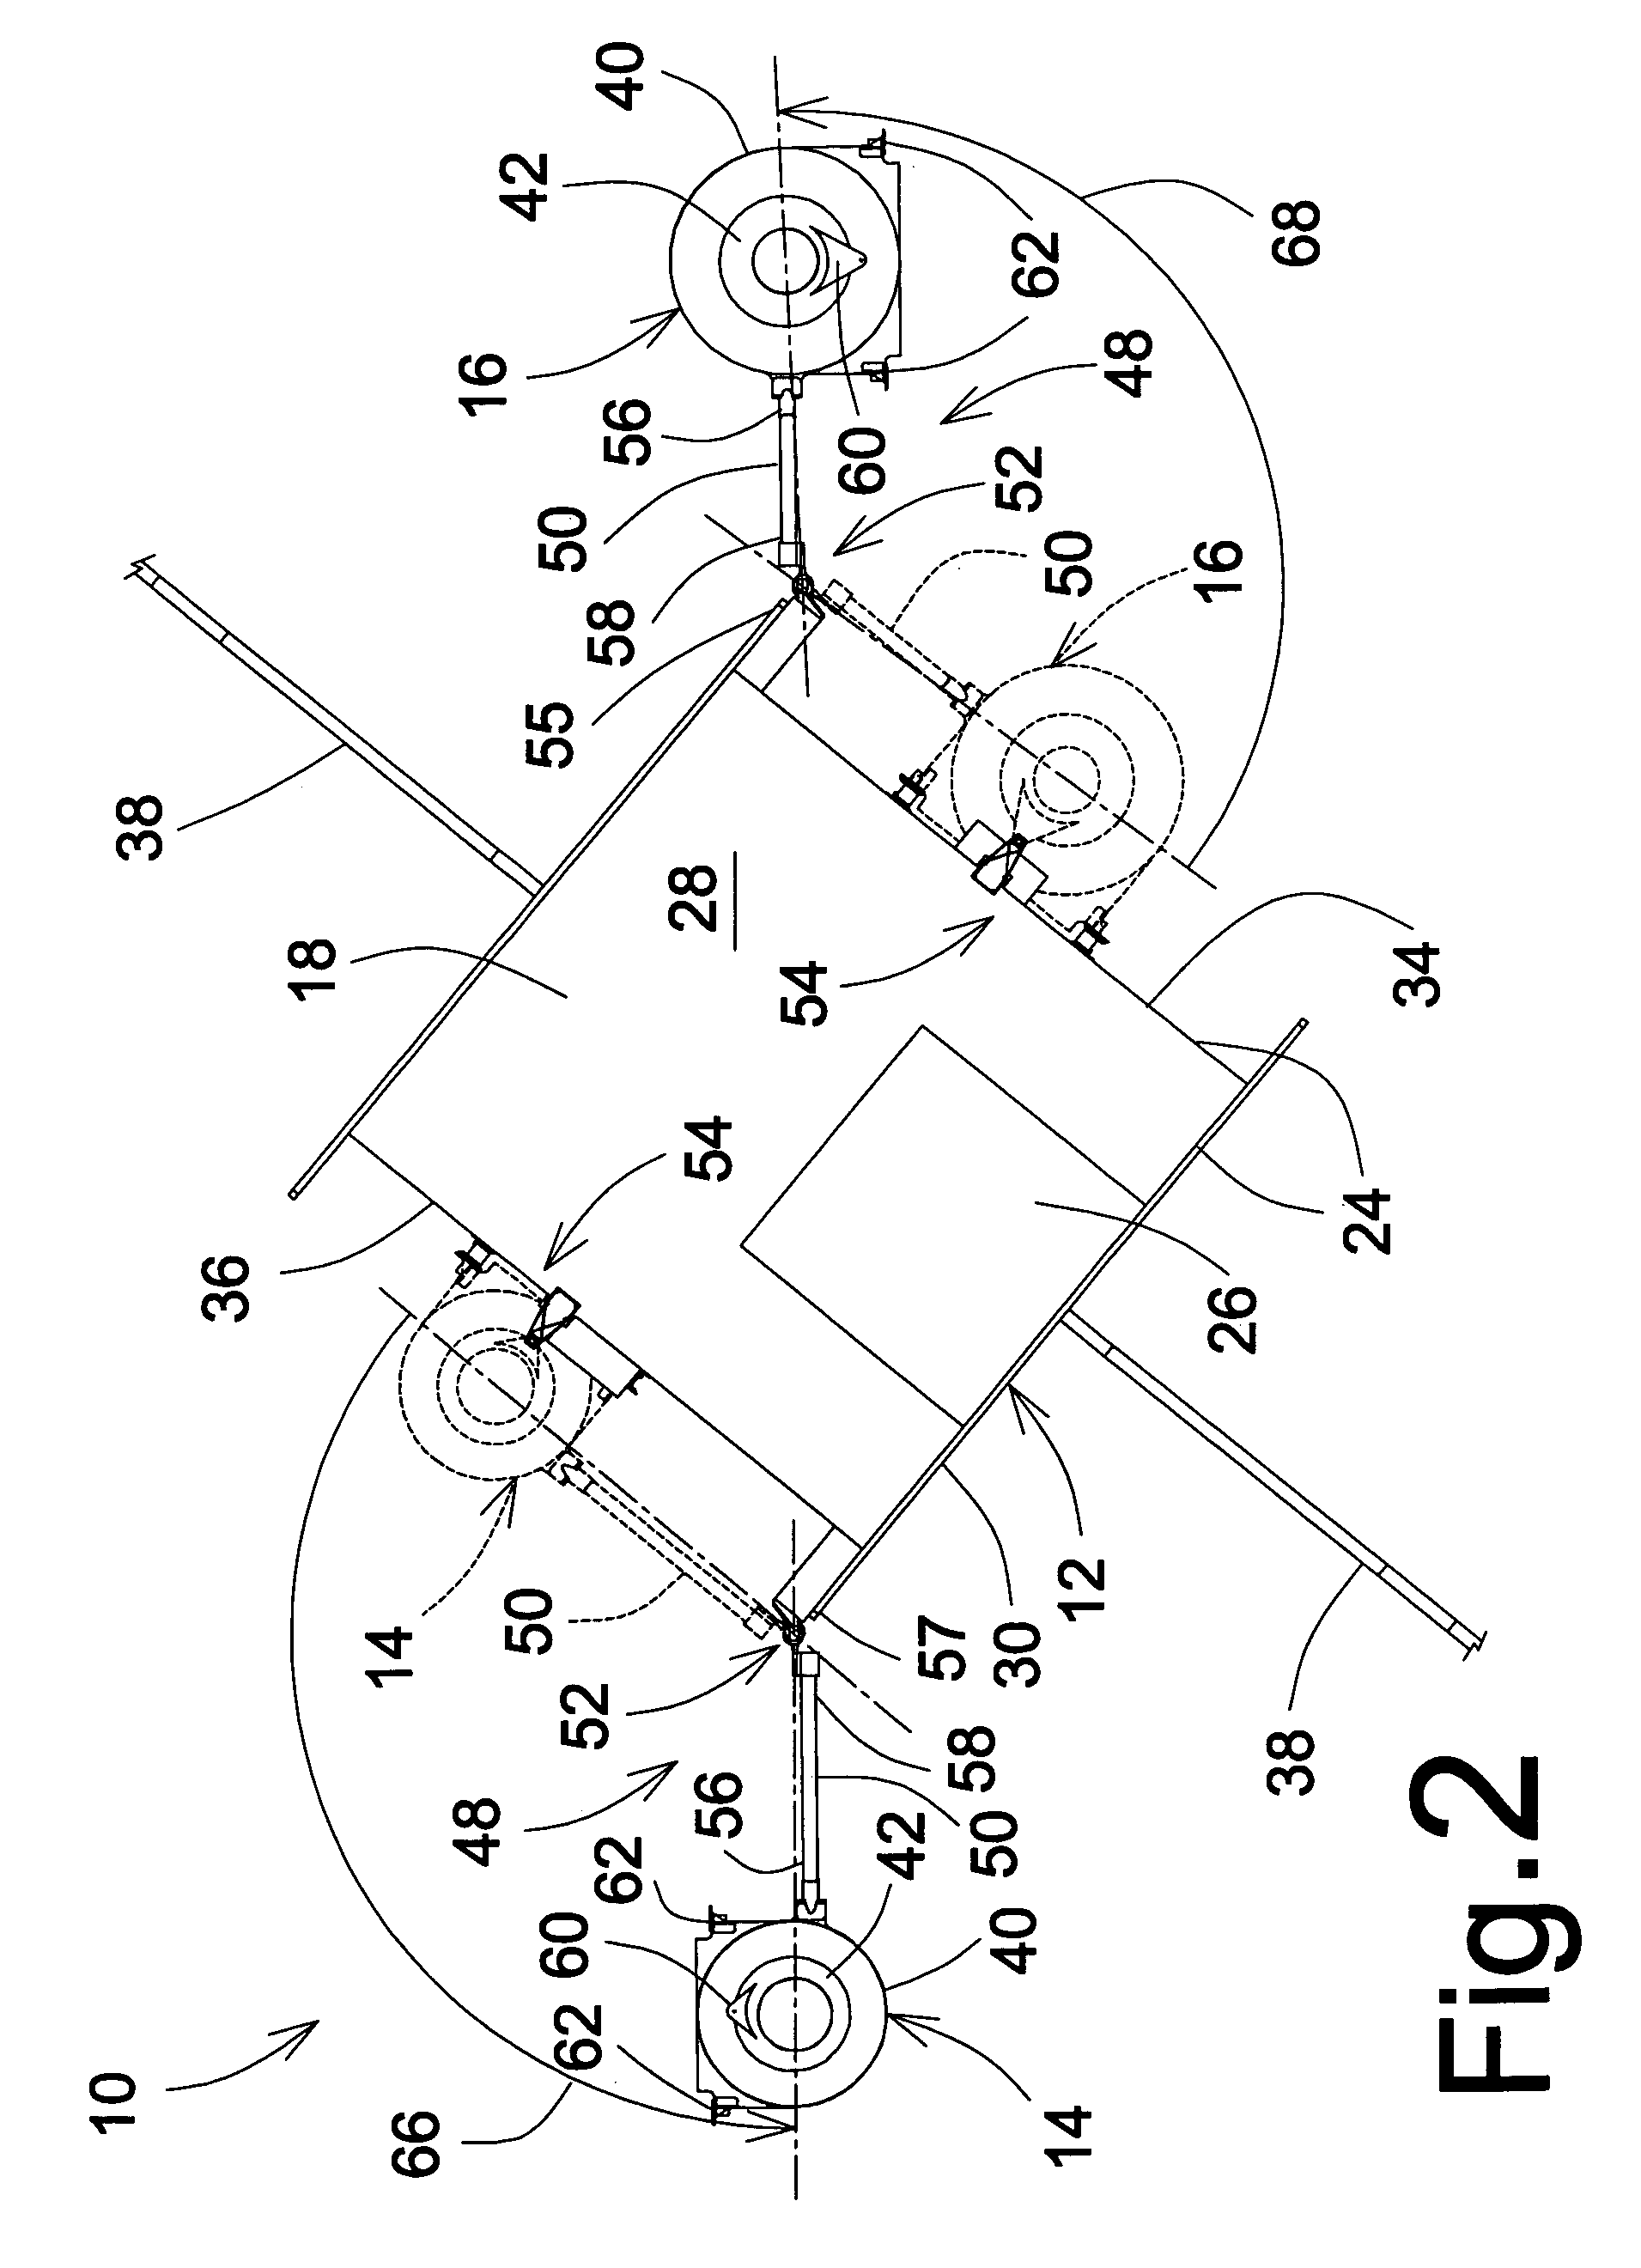 Method for improving isolation of an antenna mounted on a structure